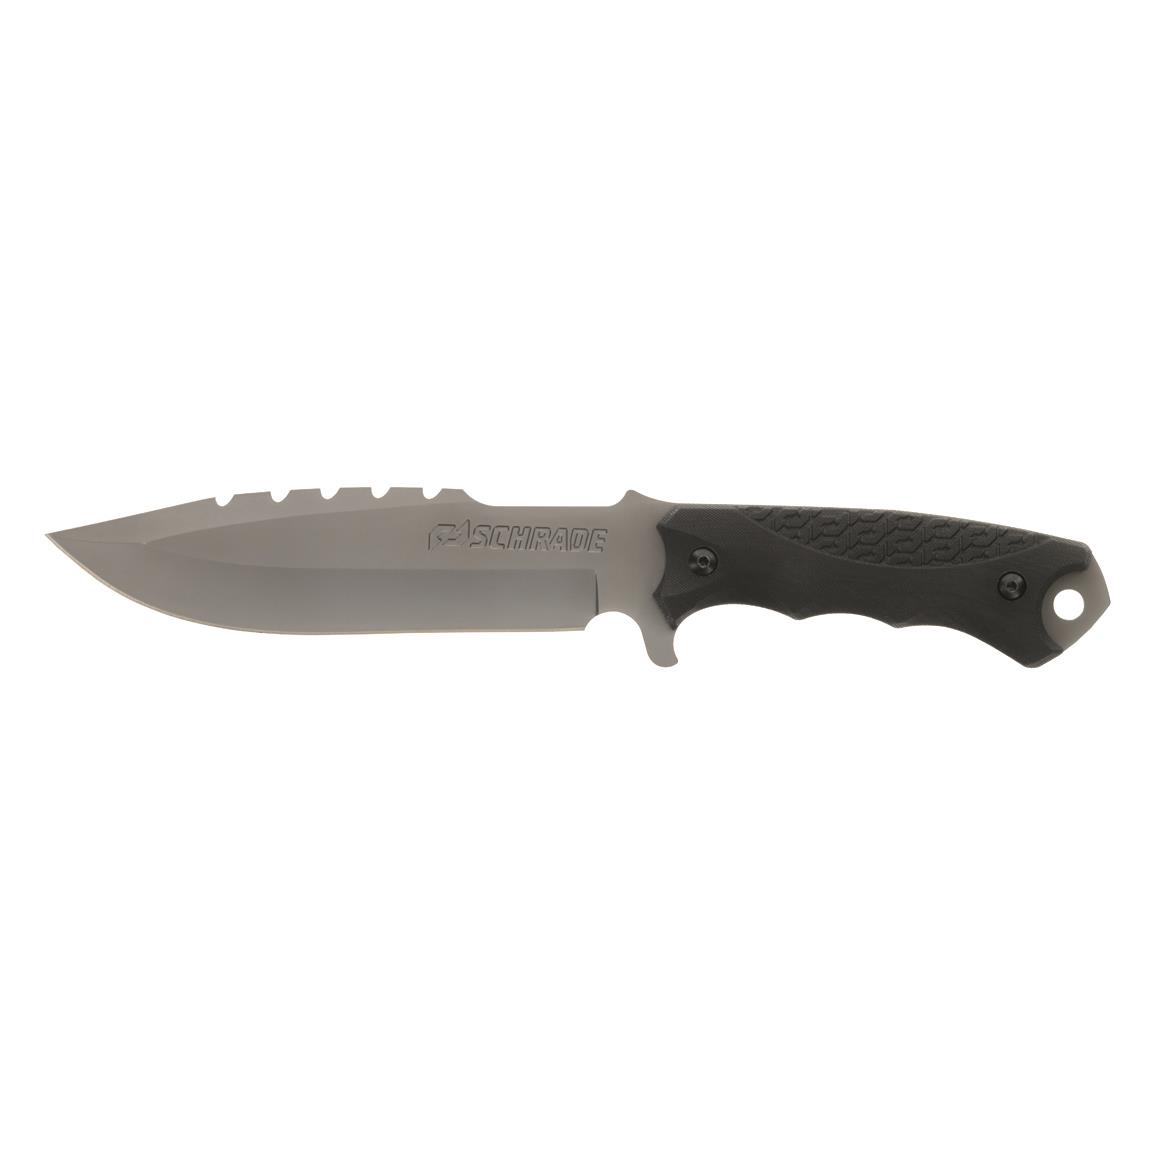 Schrade Extreme Survival AUS-10 Fixed Knife